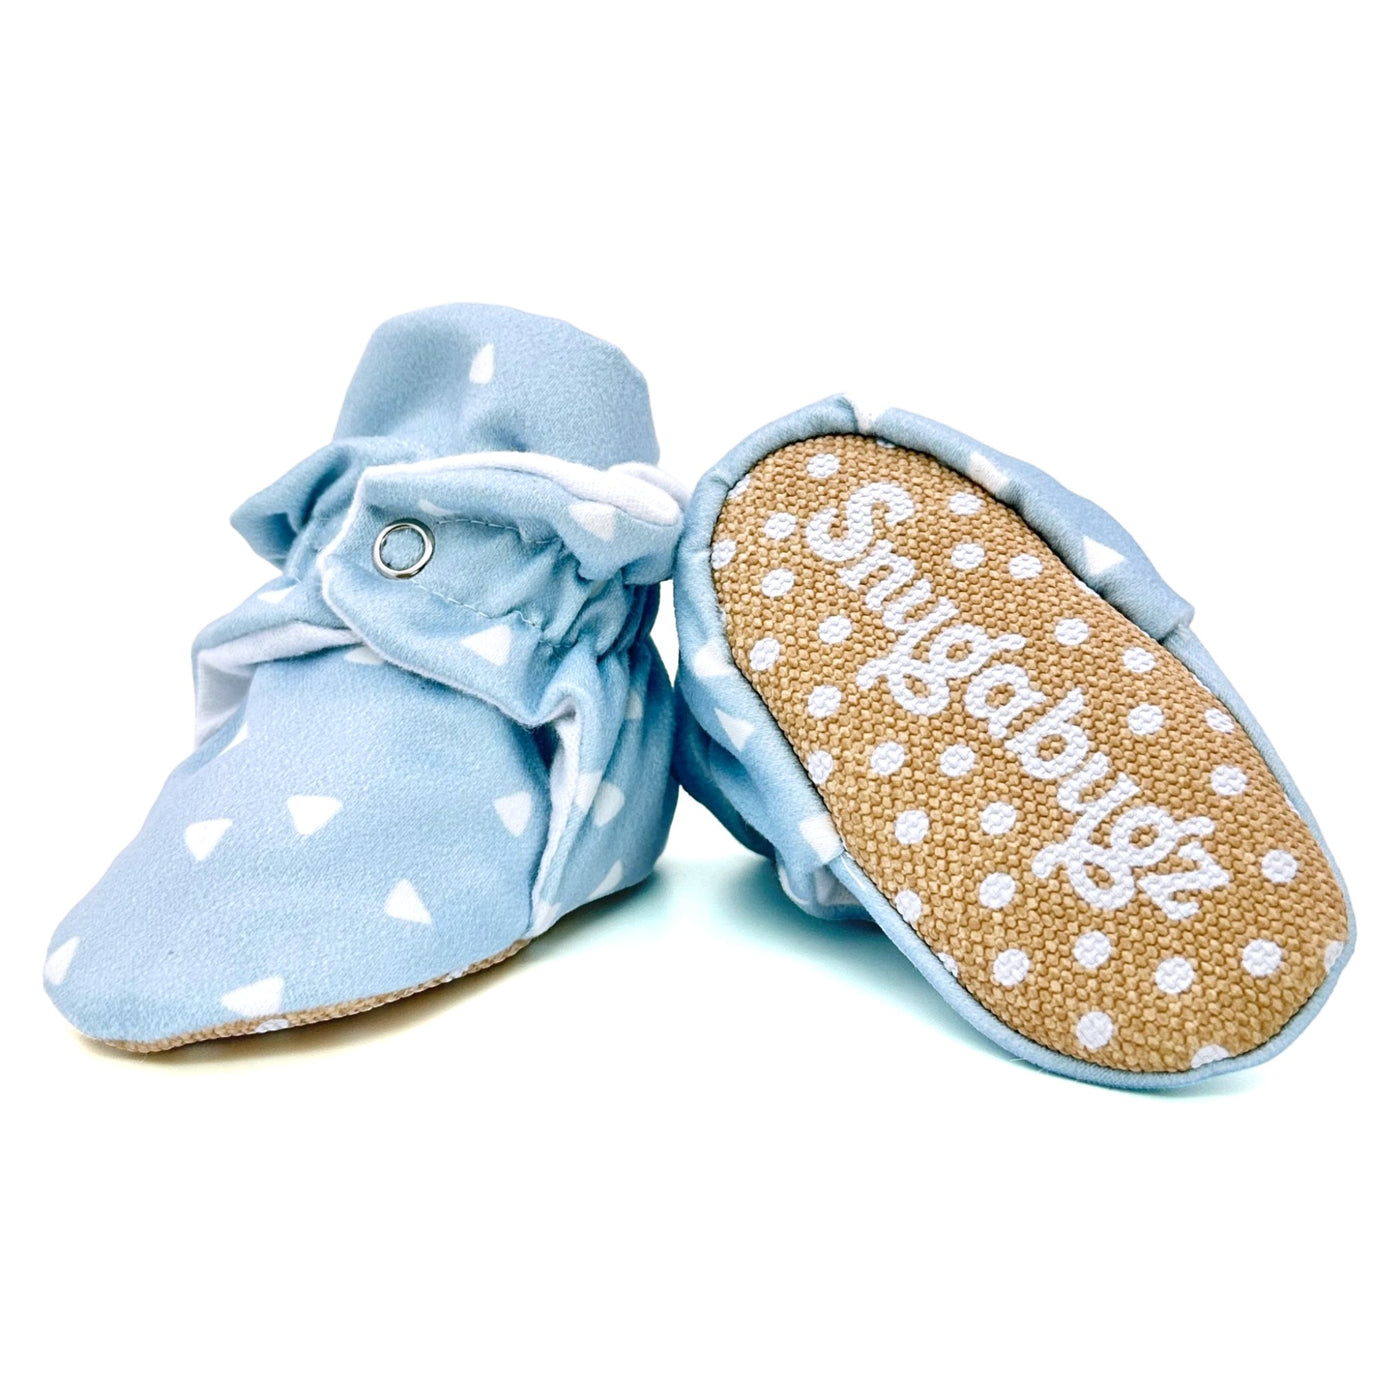 Stay-on baby booties featuring white triangles on a baby blue background print, with non-slip soles and adjustable three snap closure. Made from organic cotton.